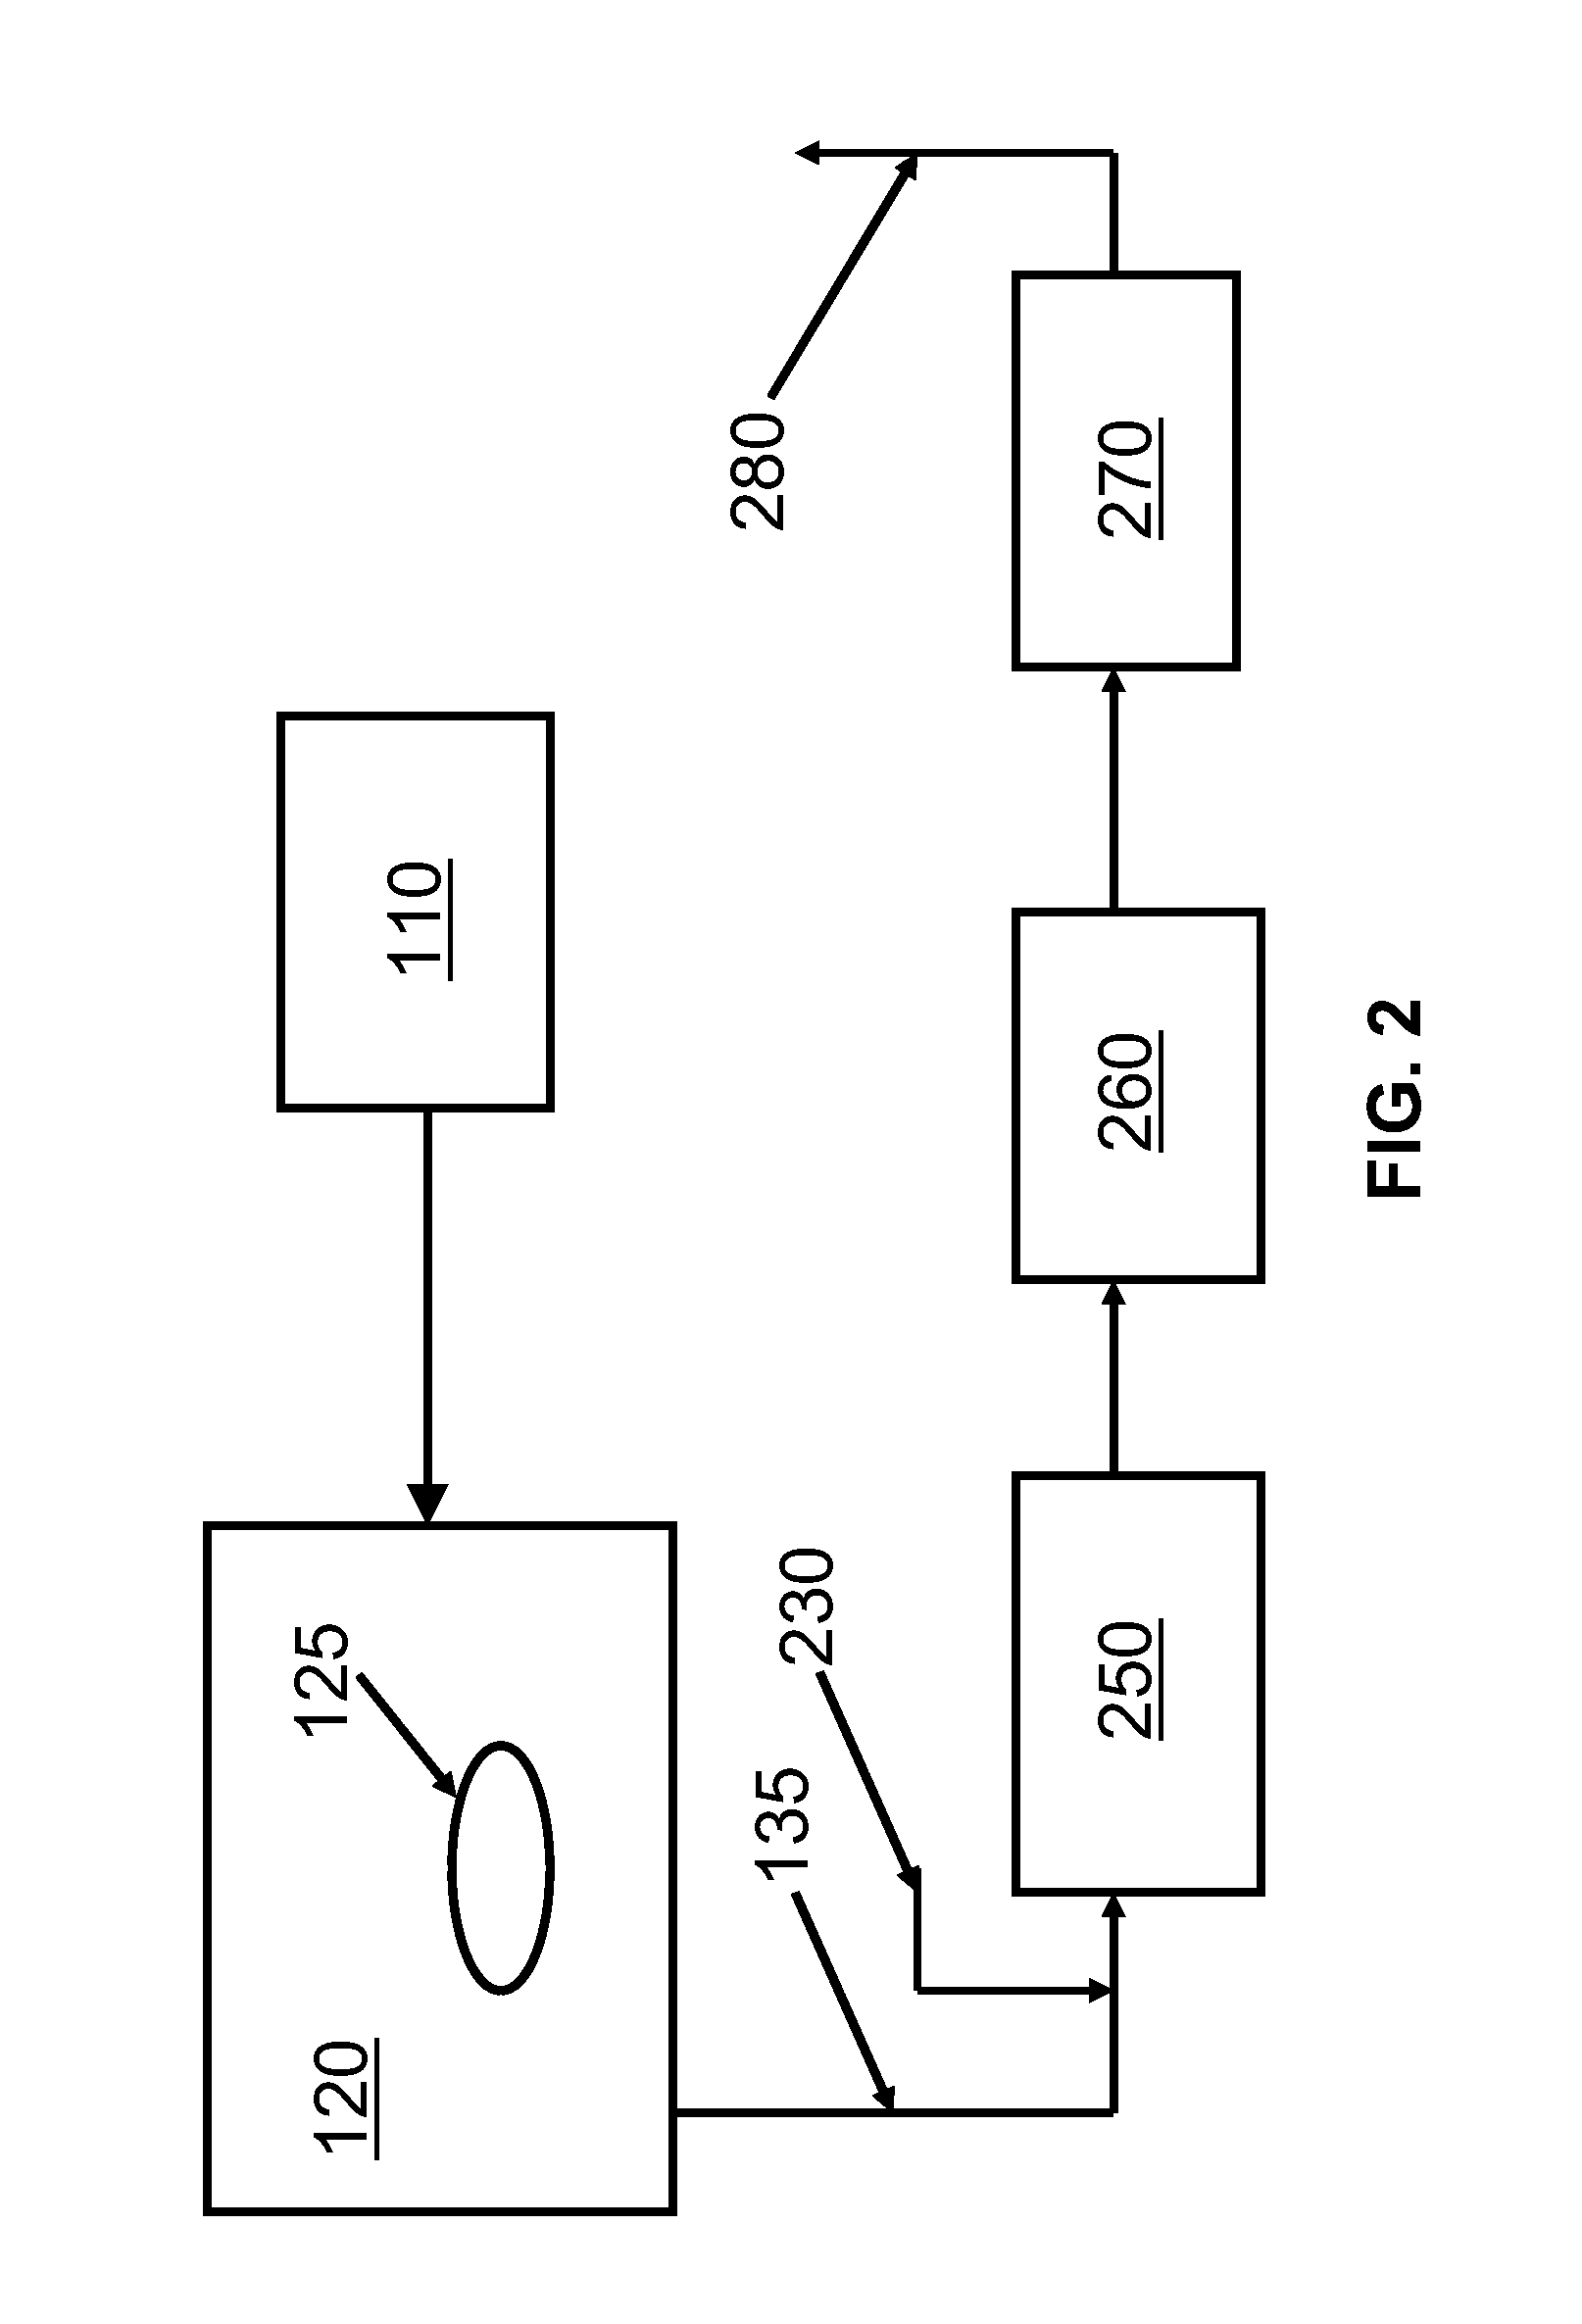 Ozone abatement system for semiconductor manufacturing system